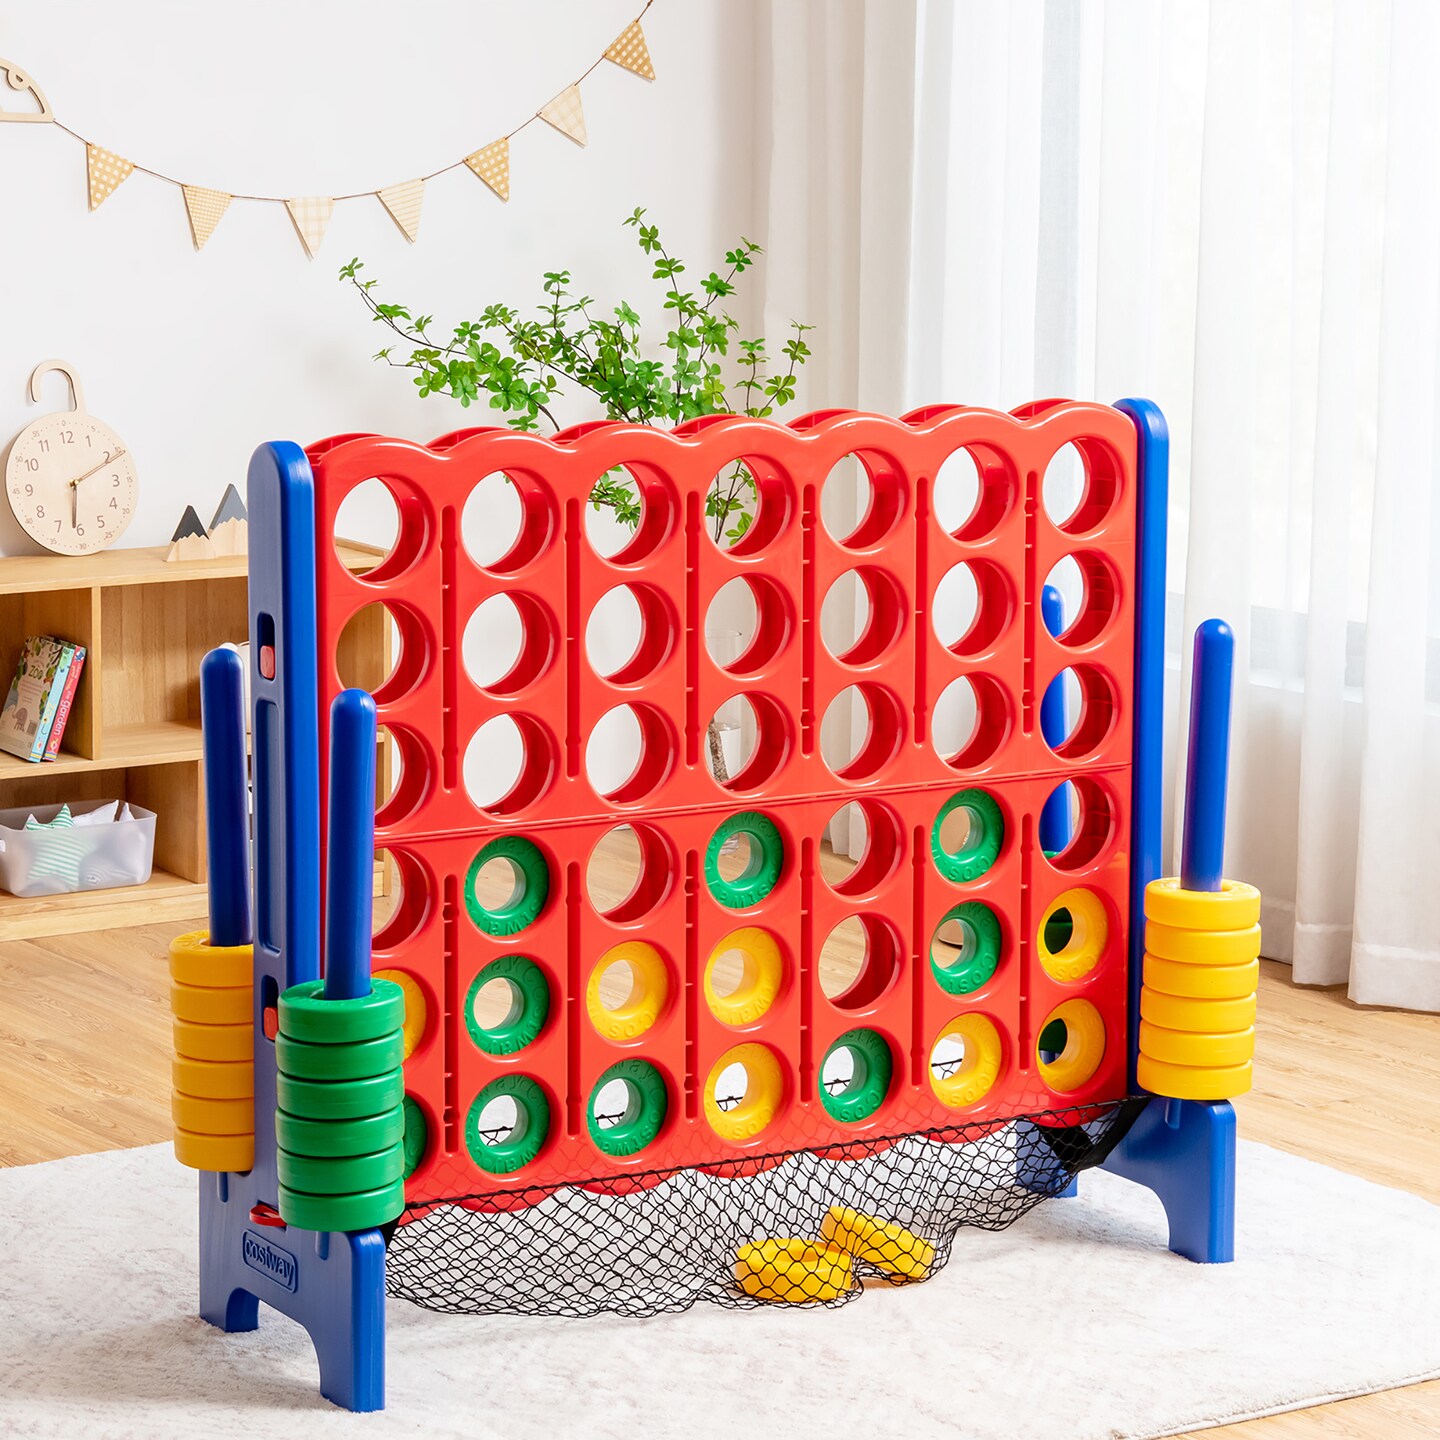 Costway 4-to-Score Giant Game Set 4-in-a-Row Connect Game W/Net Storage for Kids &#x26; Adult